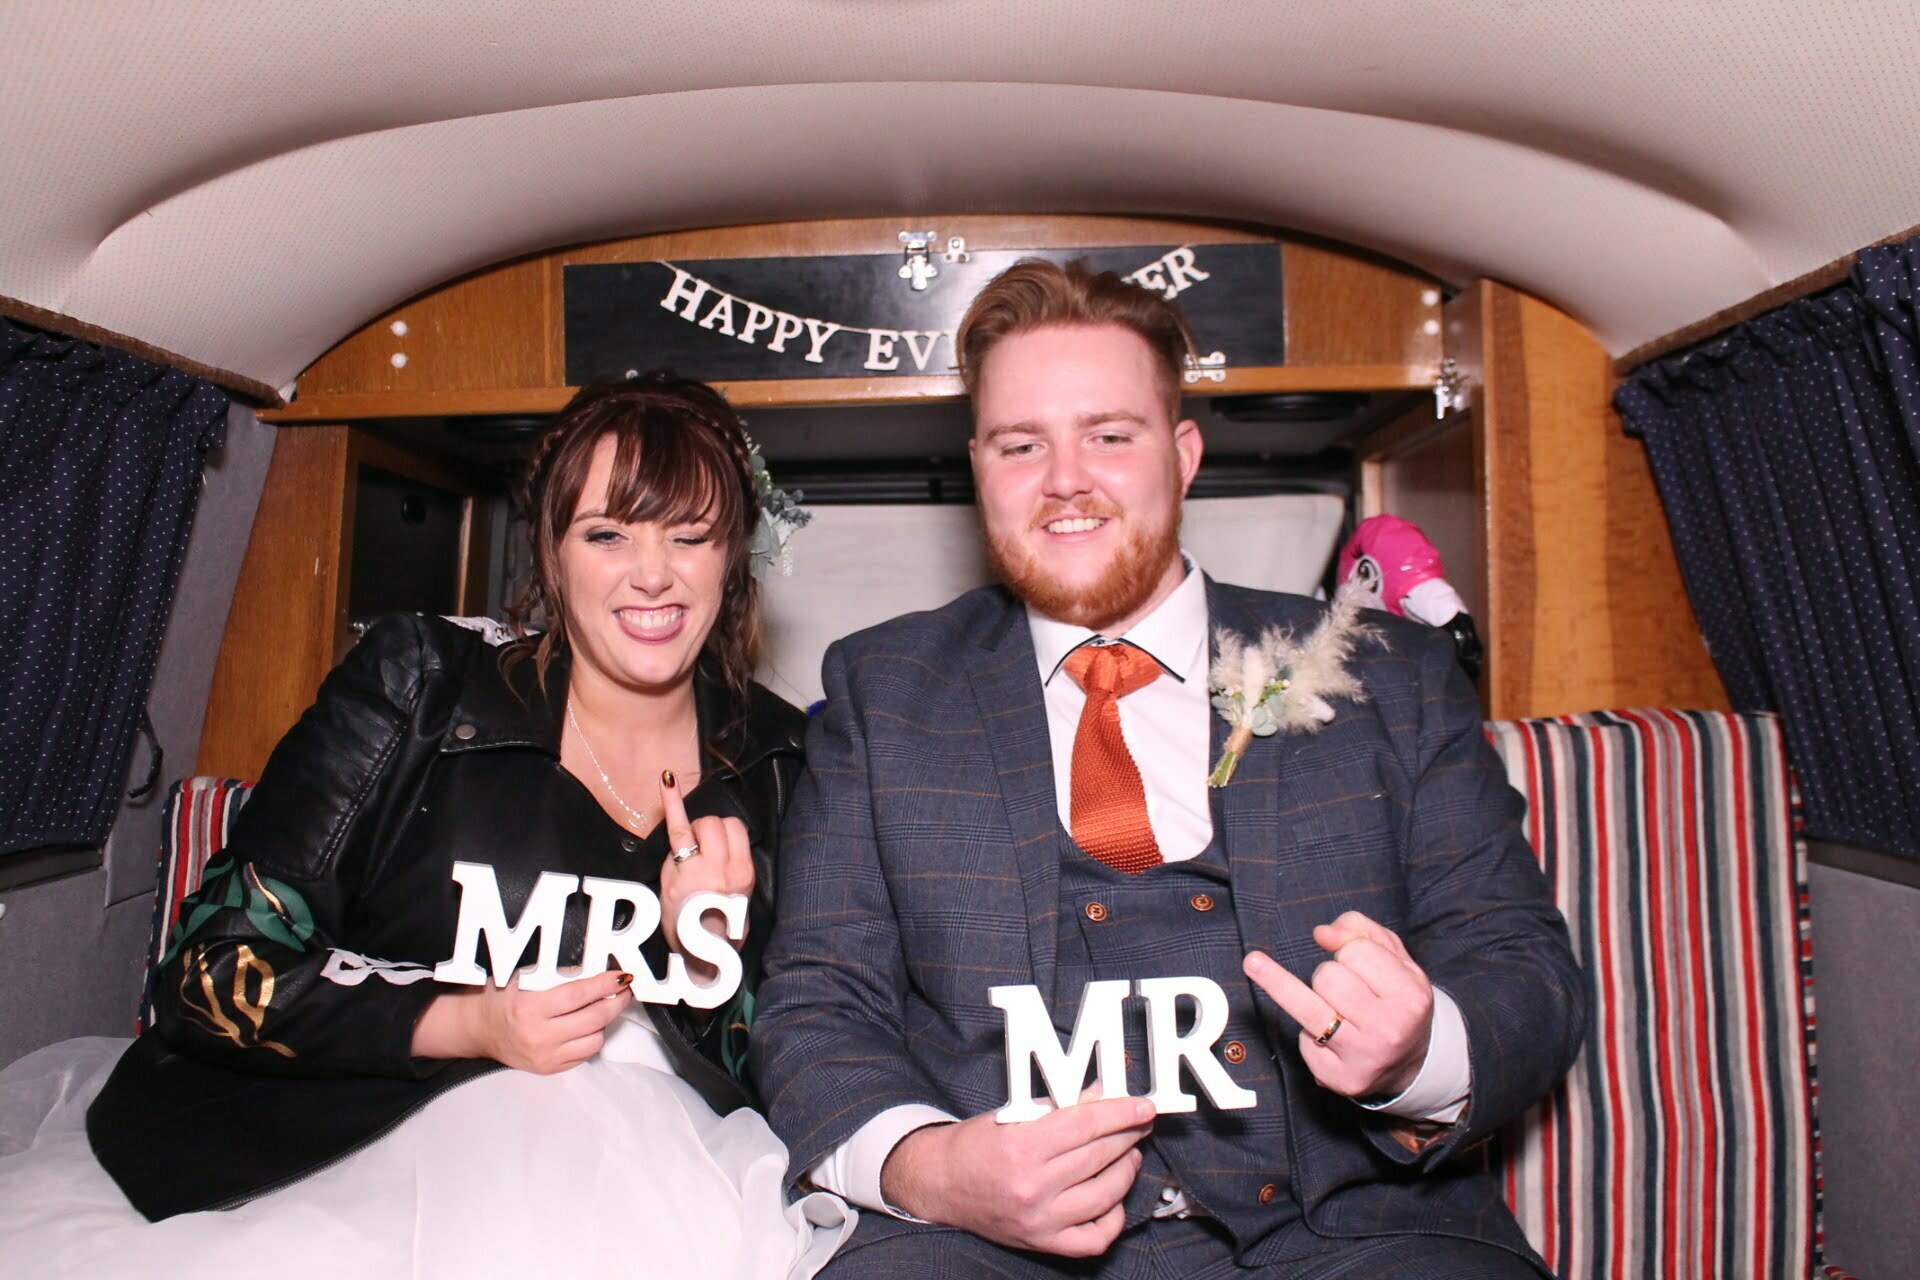 Newlywed having fun in the vw photo booth